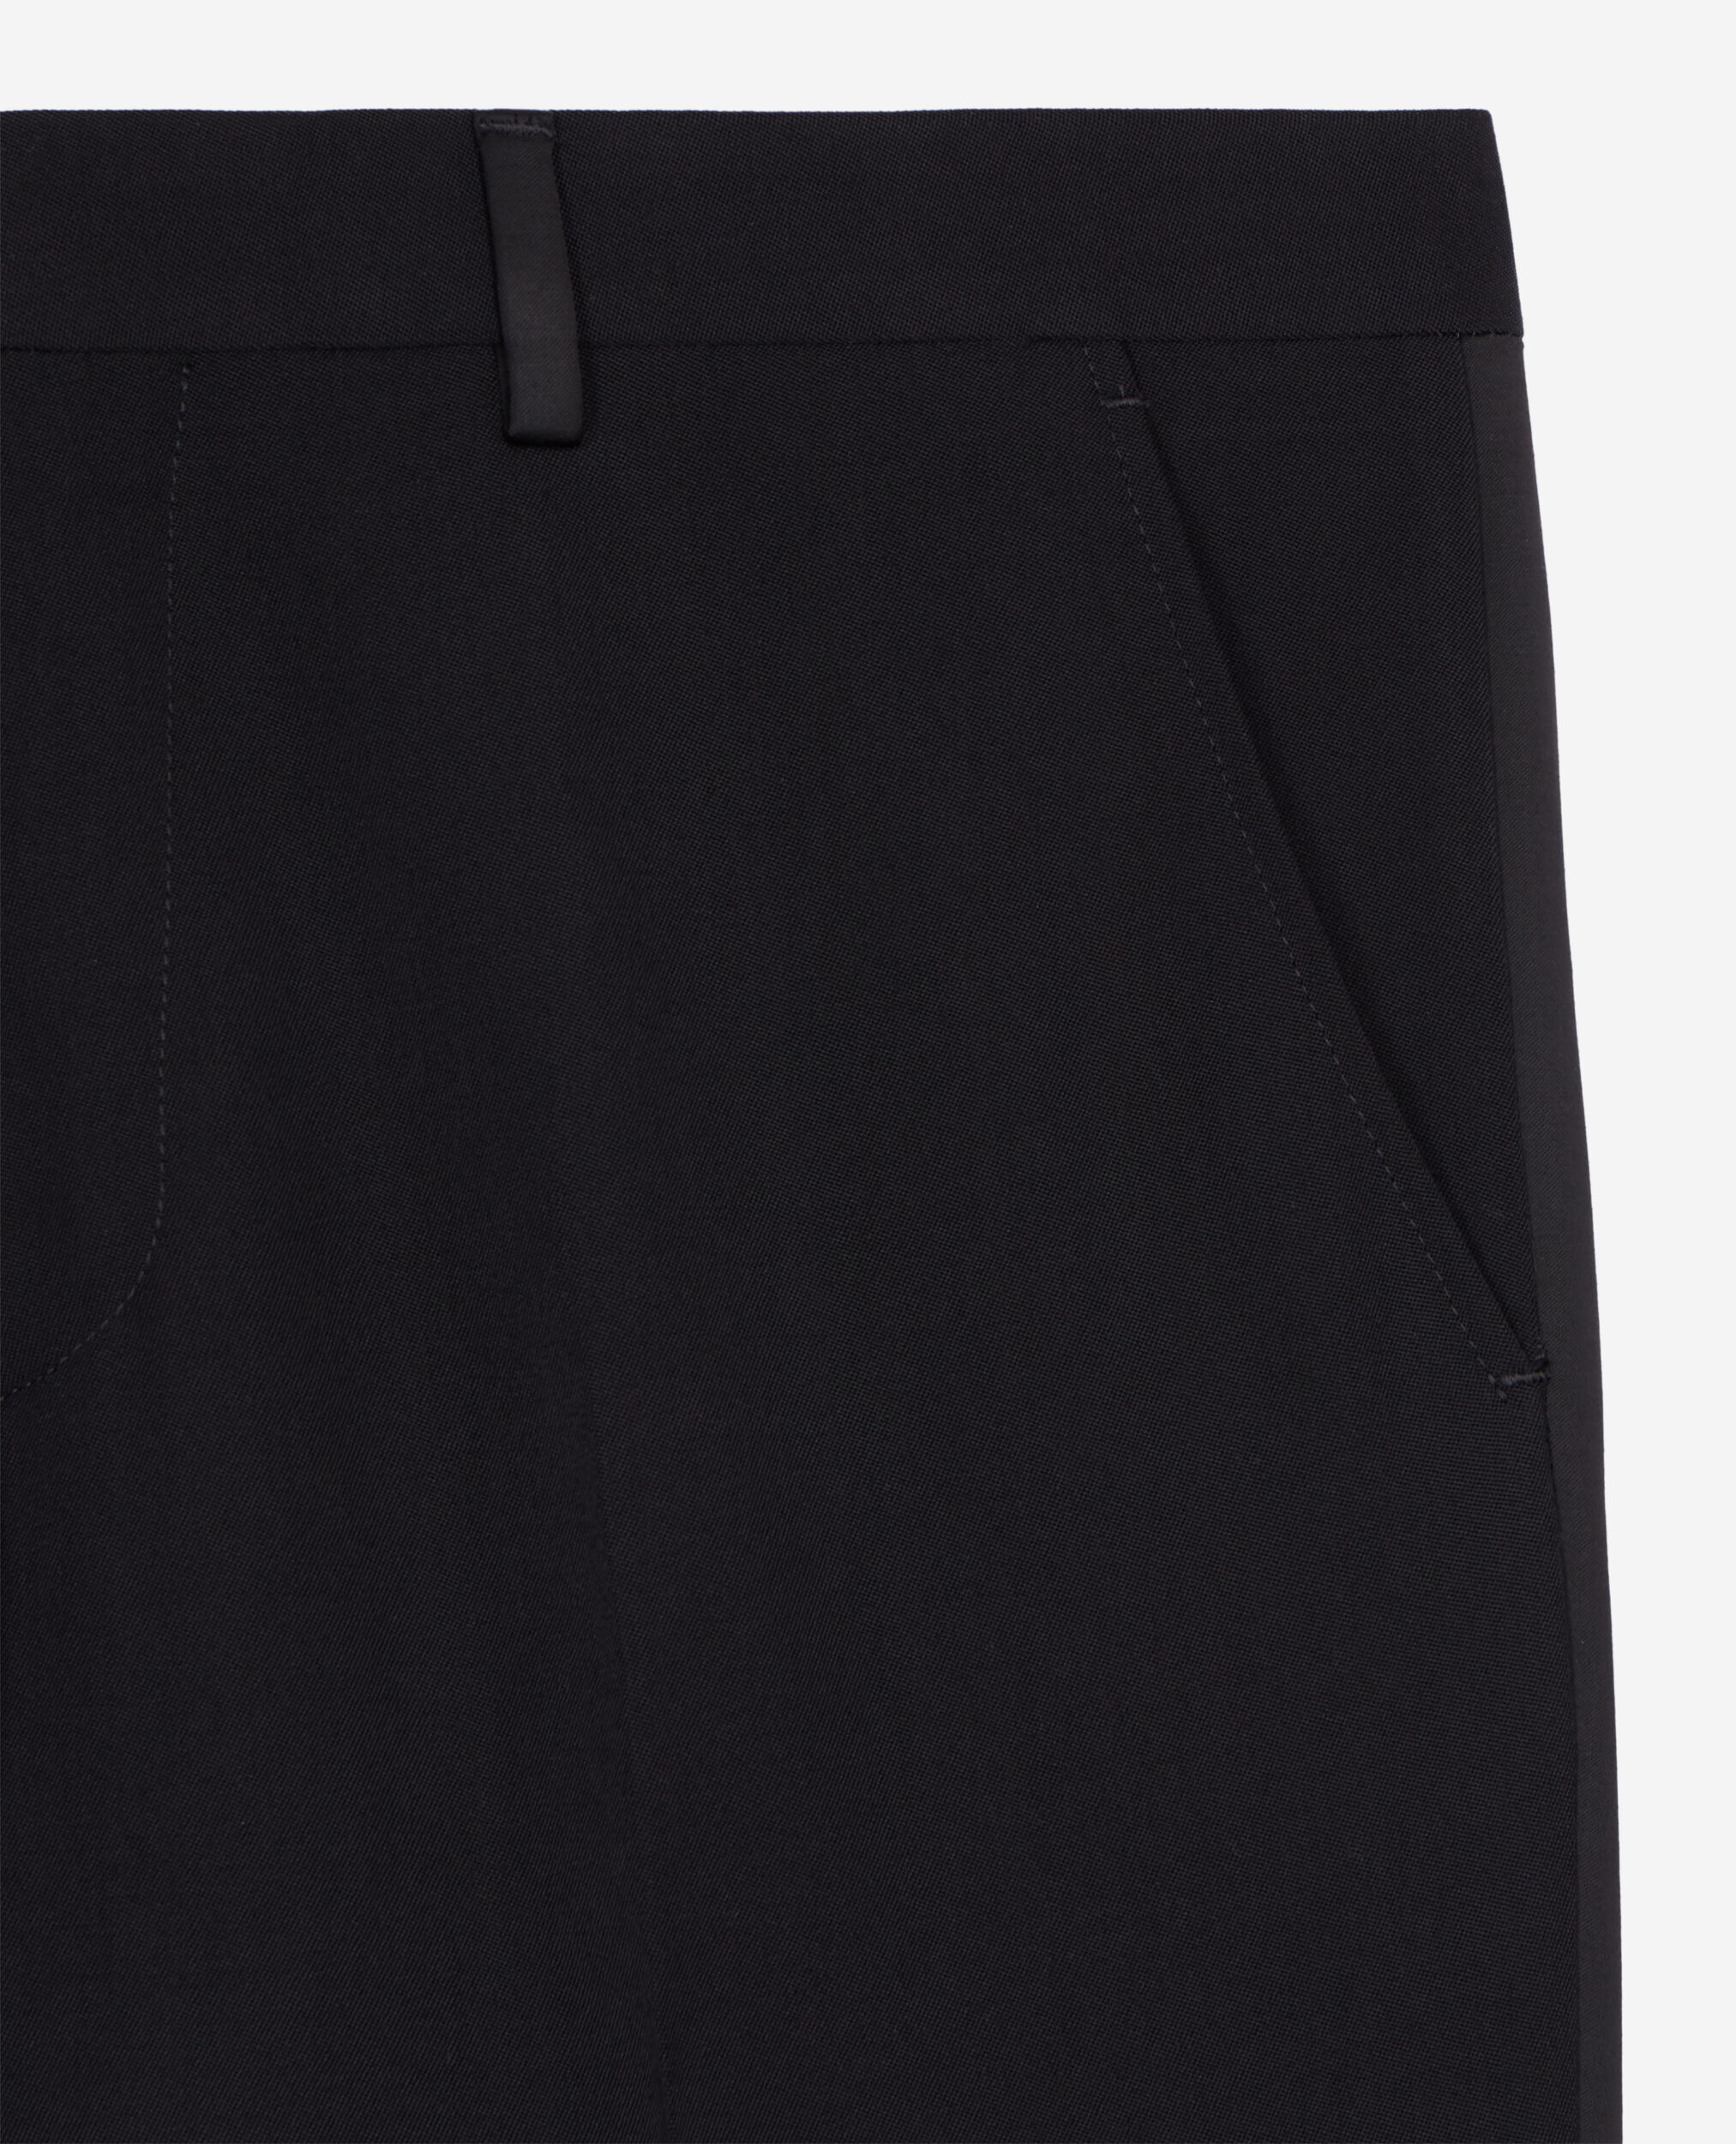 Black tuxedo trousers with satin details, BLACK, hi-res image number null